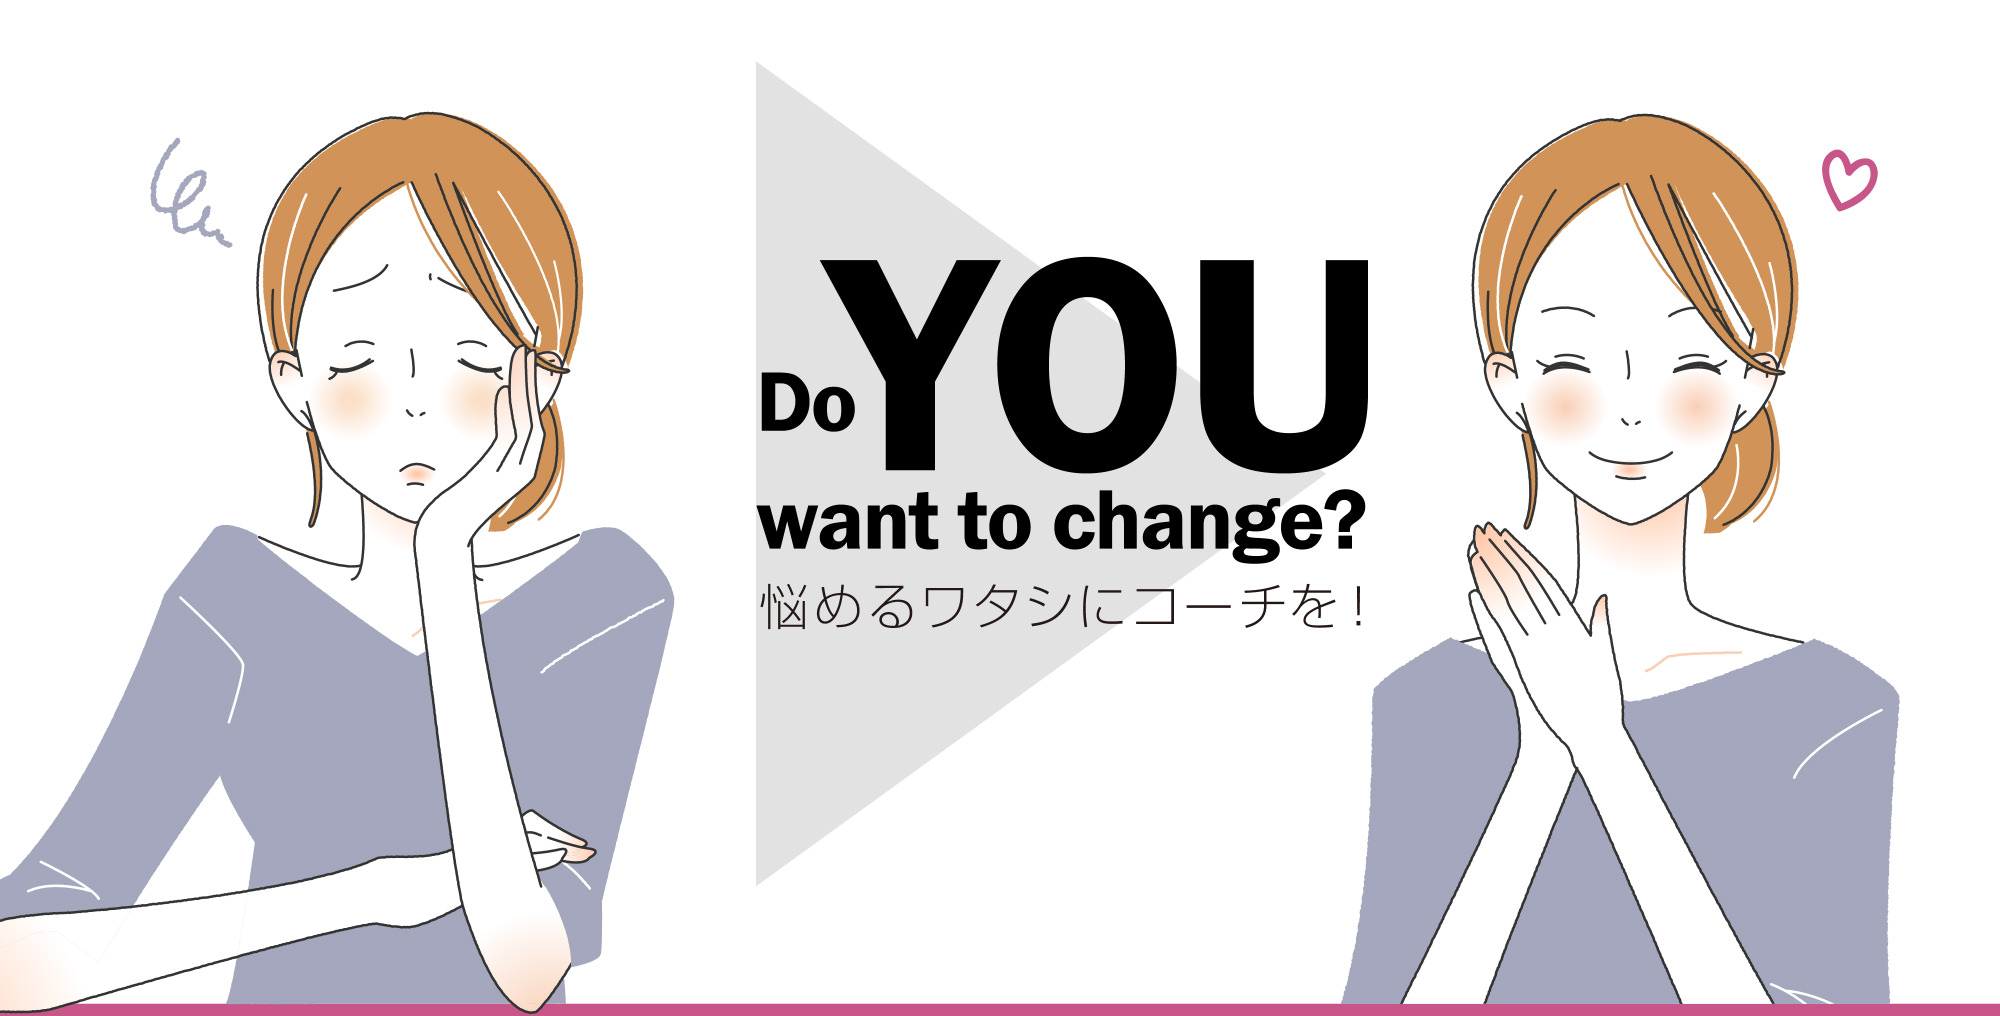 Do YOU want to change? 悩めるワタシにコーチを！